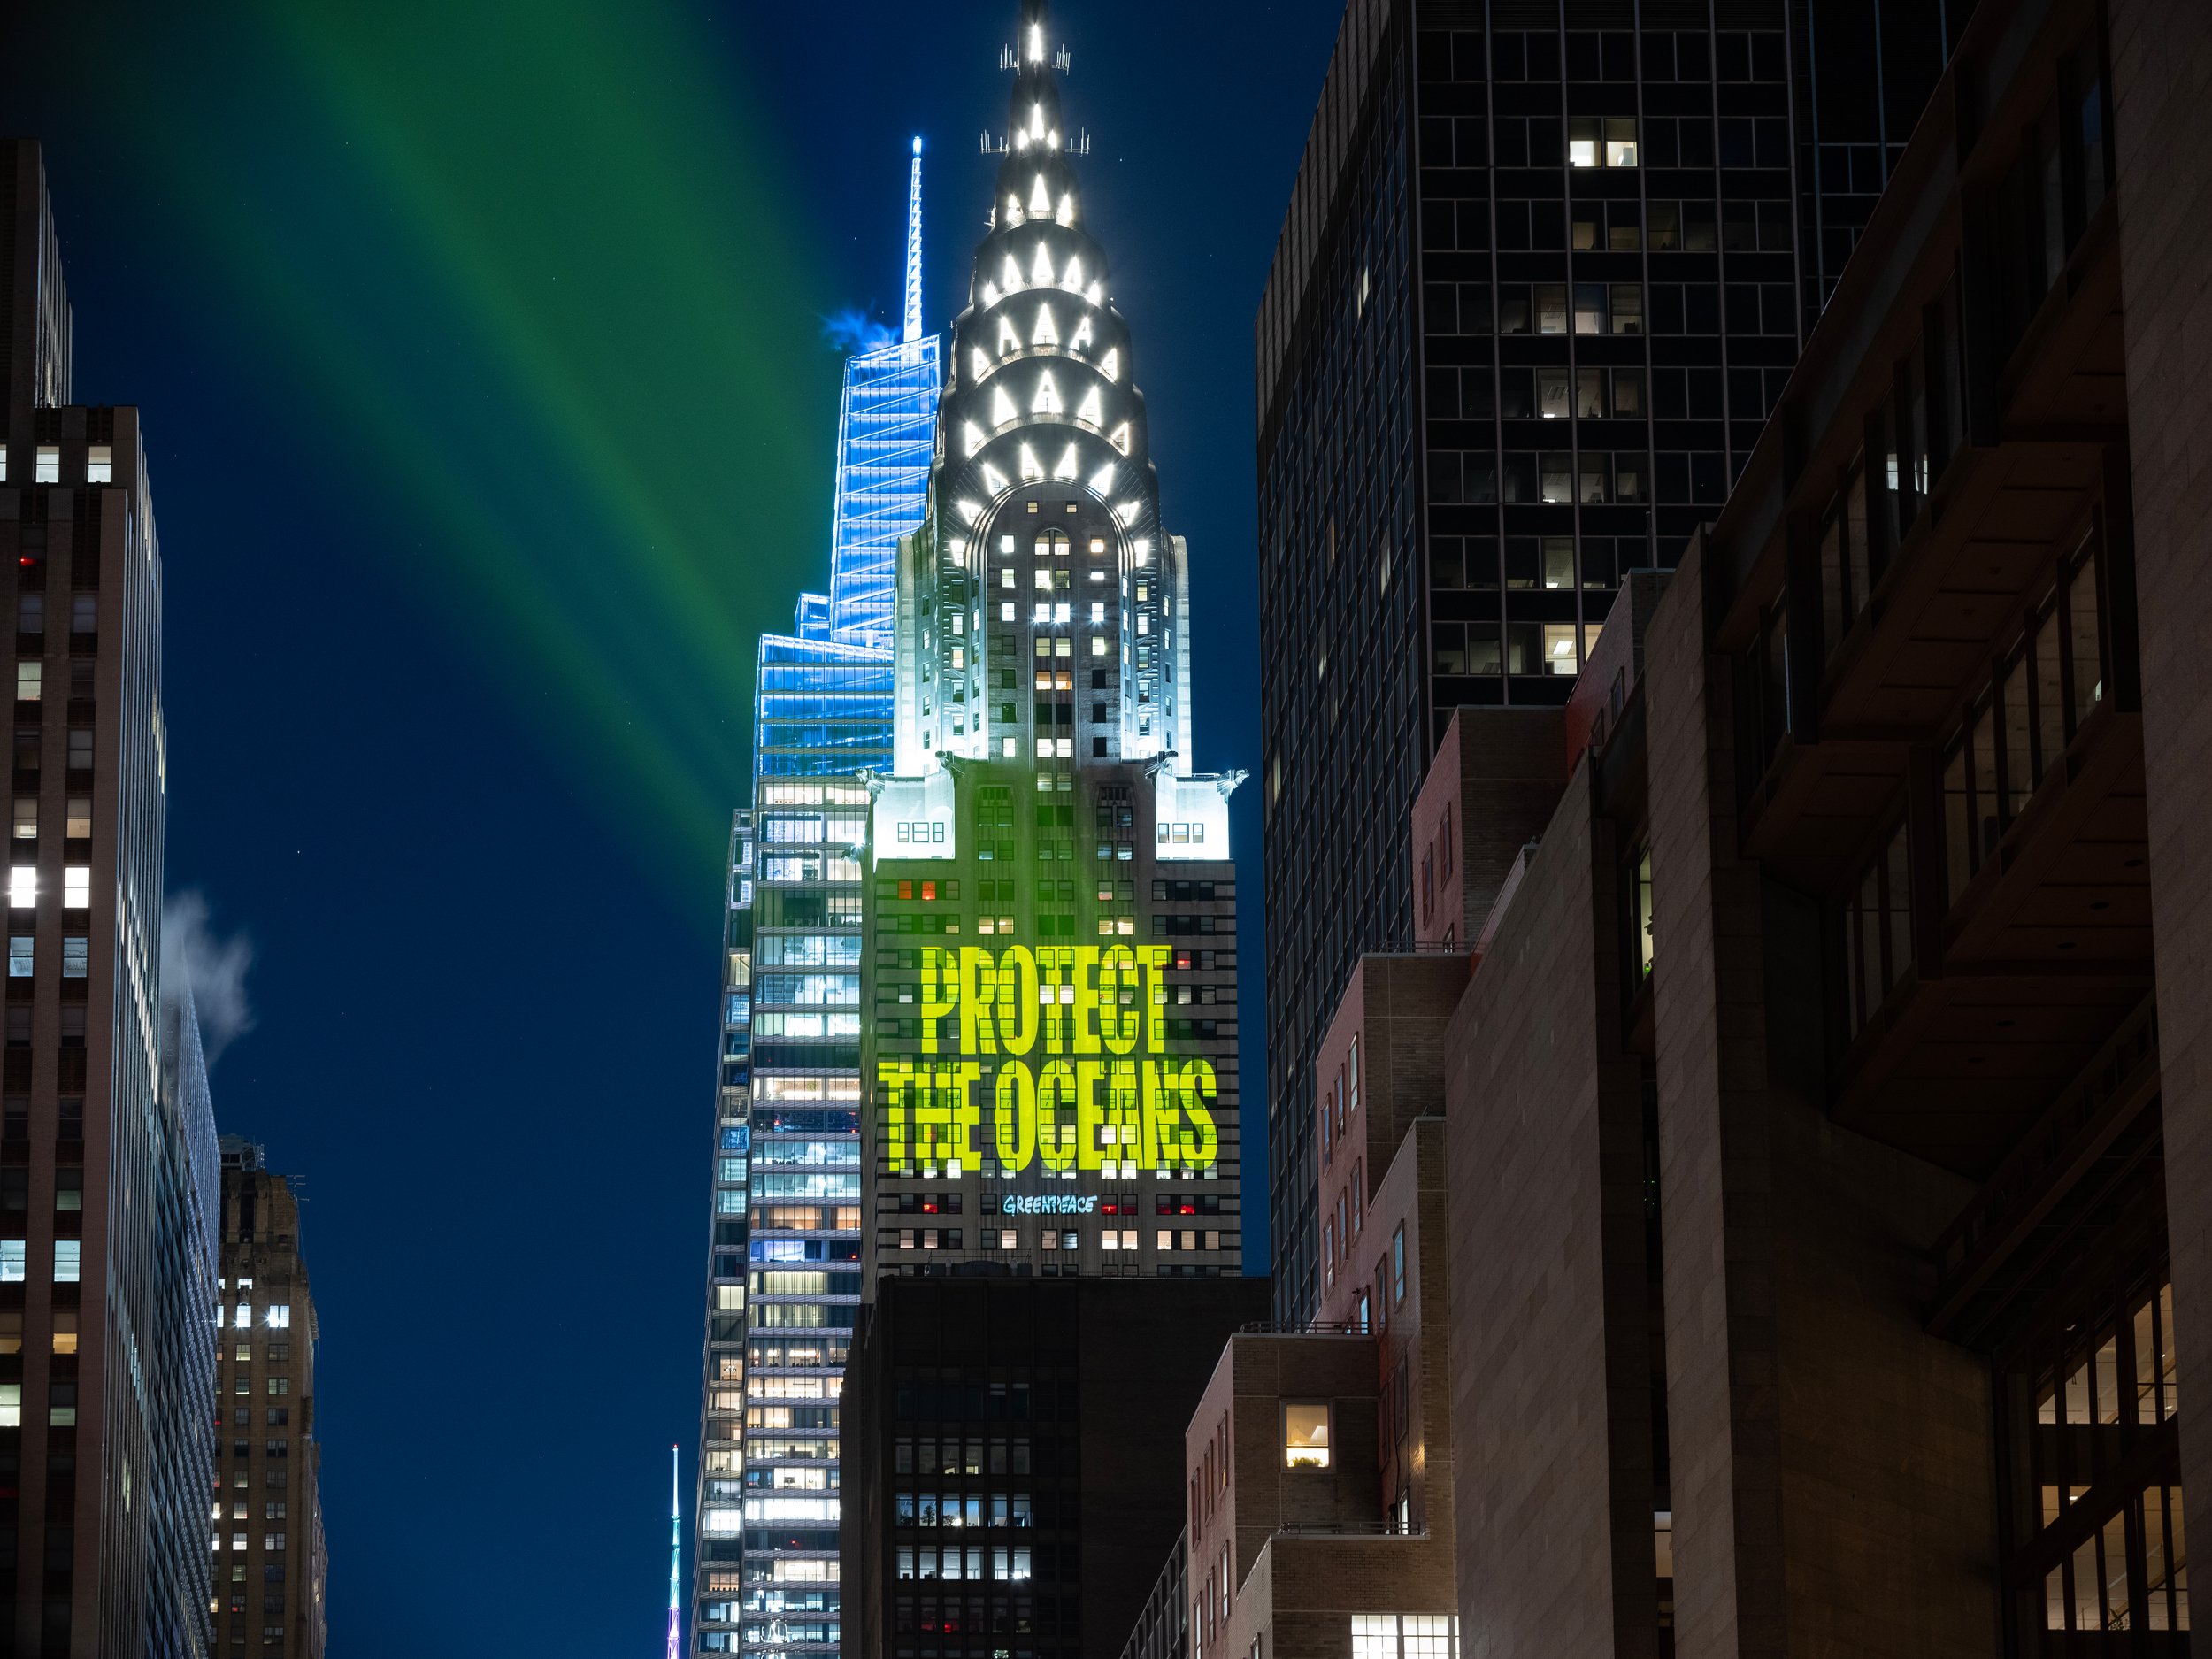 'Protect the oceans' slogan is projected on the side of the iconic Chrysler building in New York.